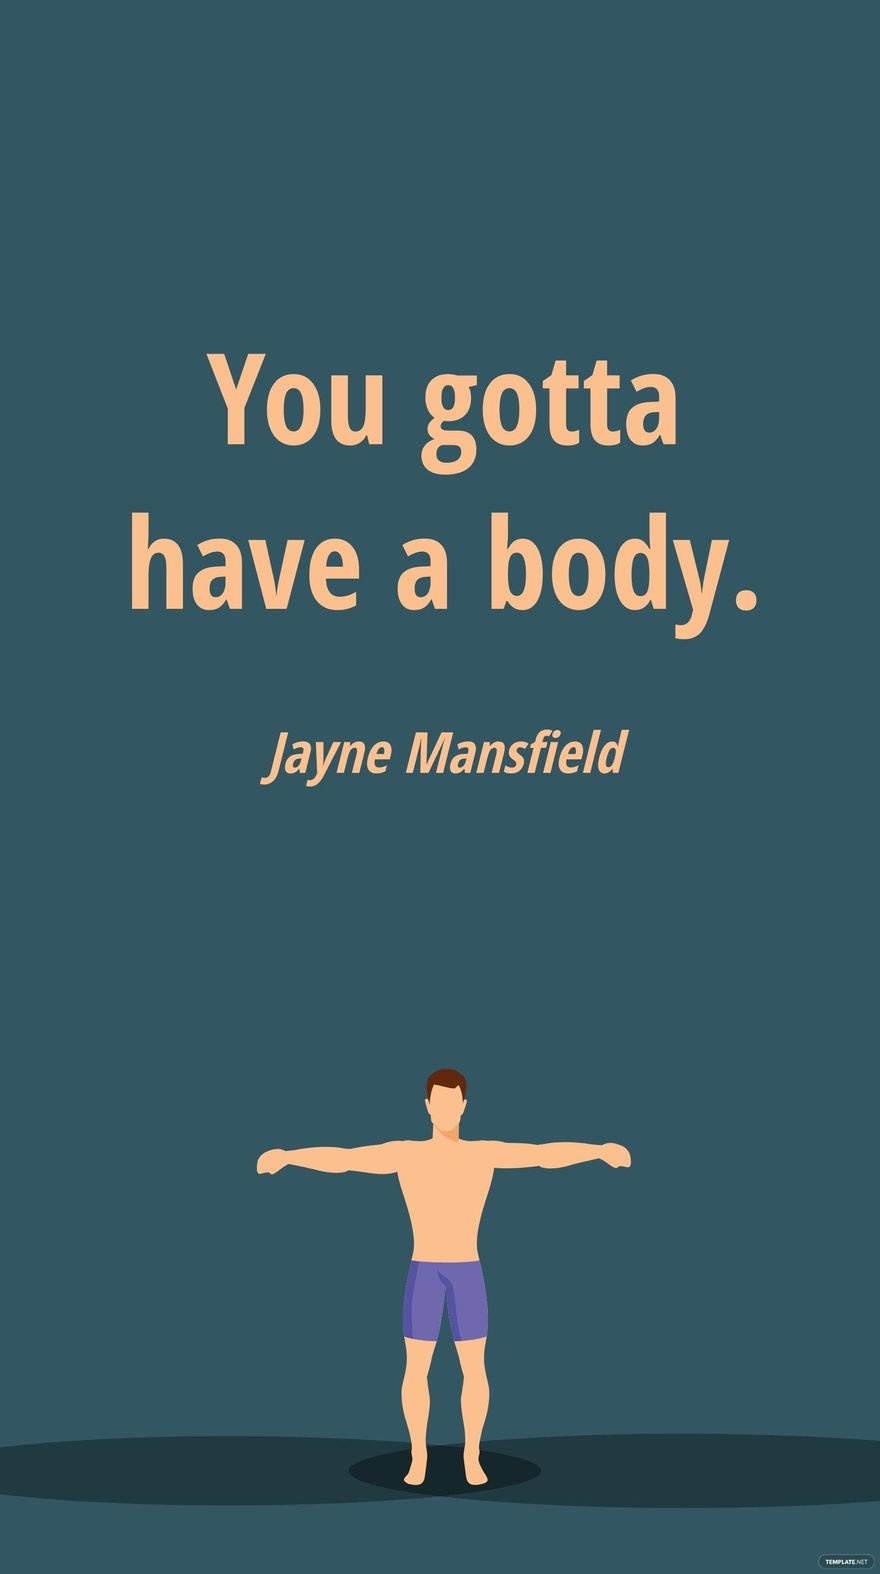 Free Jayne Mansfield - You gotta have a body.